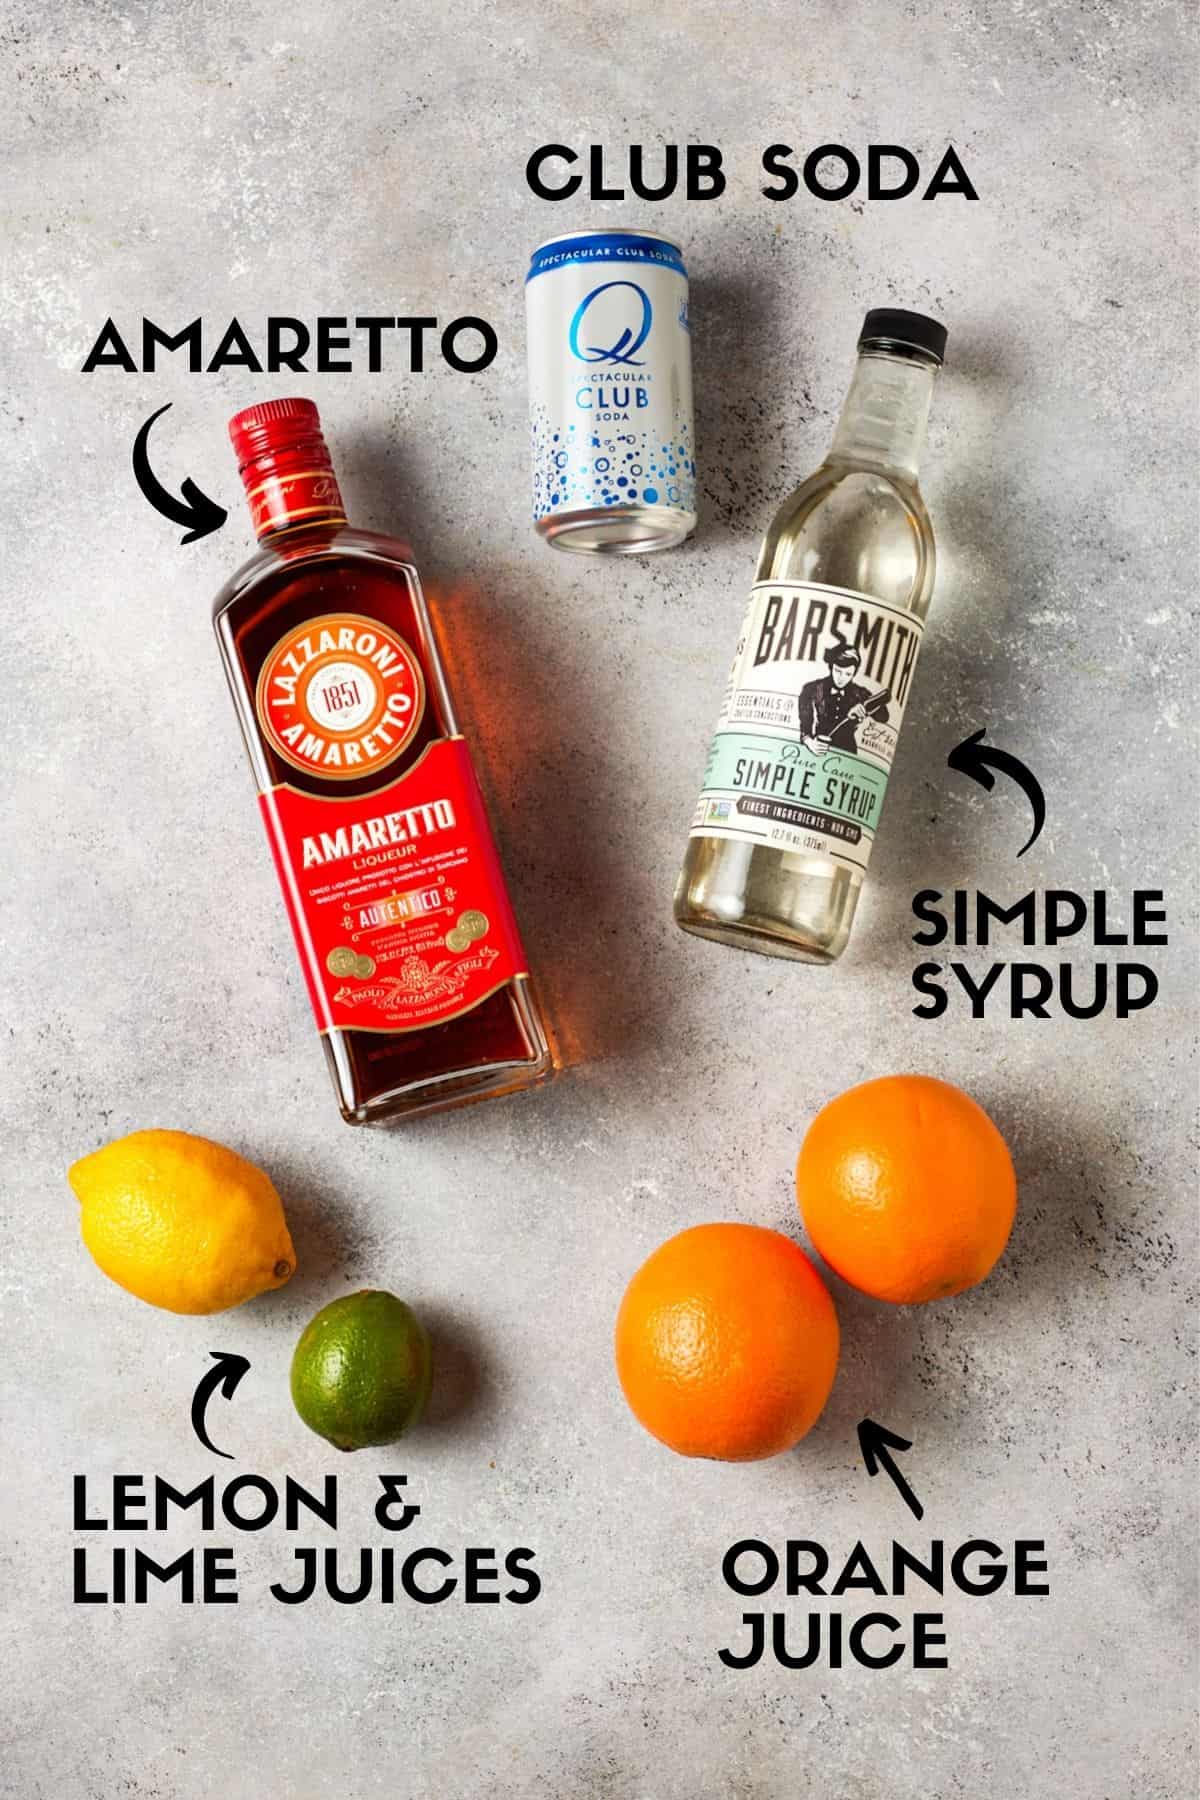 Bottle of amaretto, citrus fruits, simple syrup and club soda. 